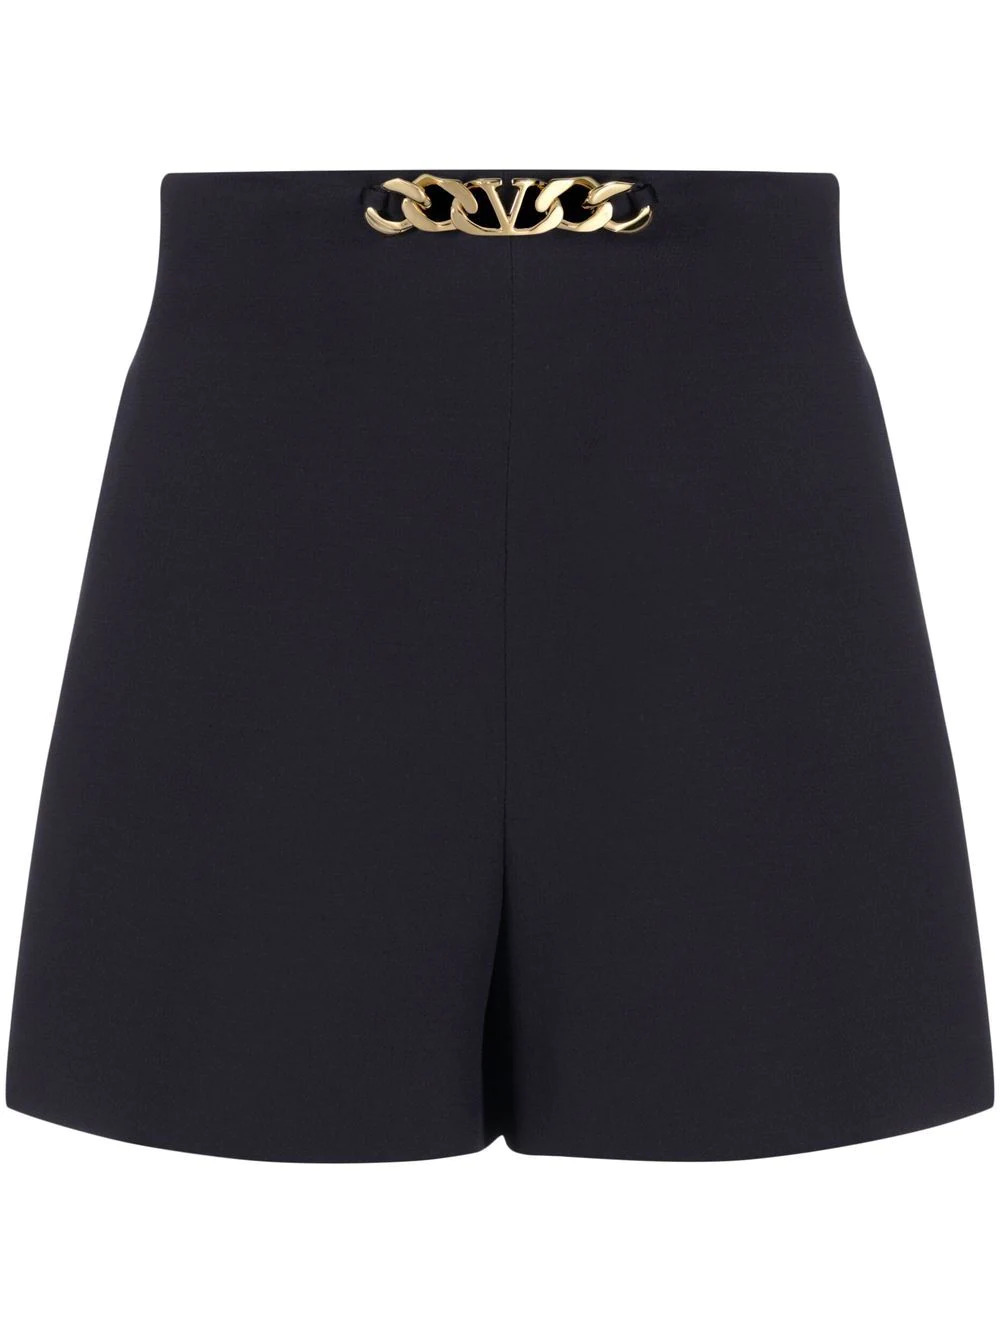 Shorts with gold detail in navy